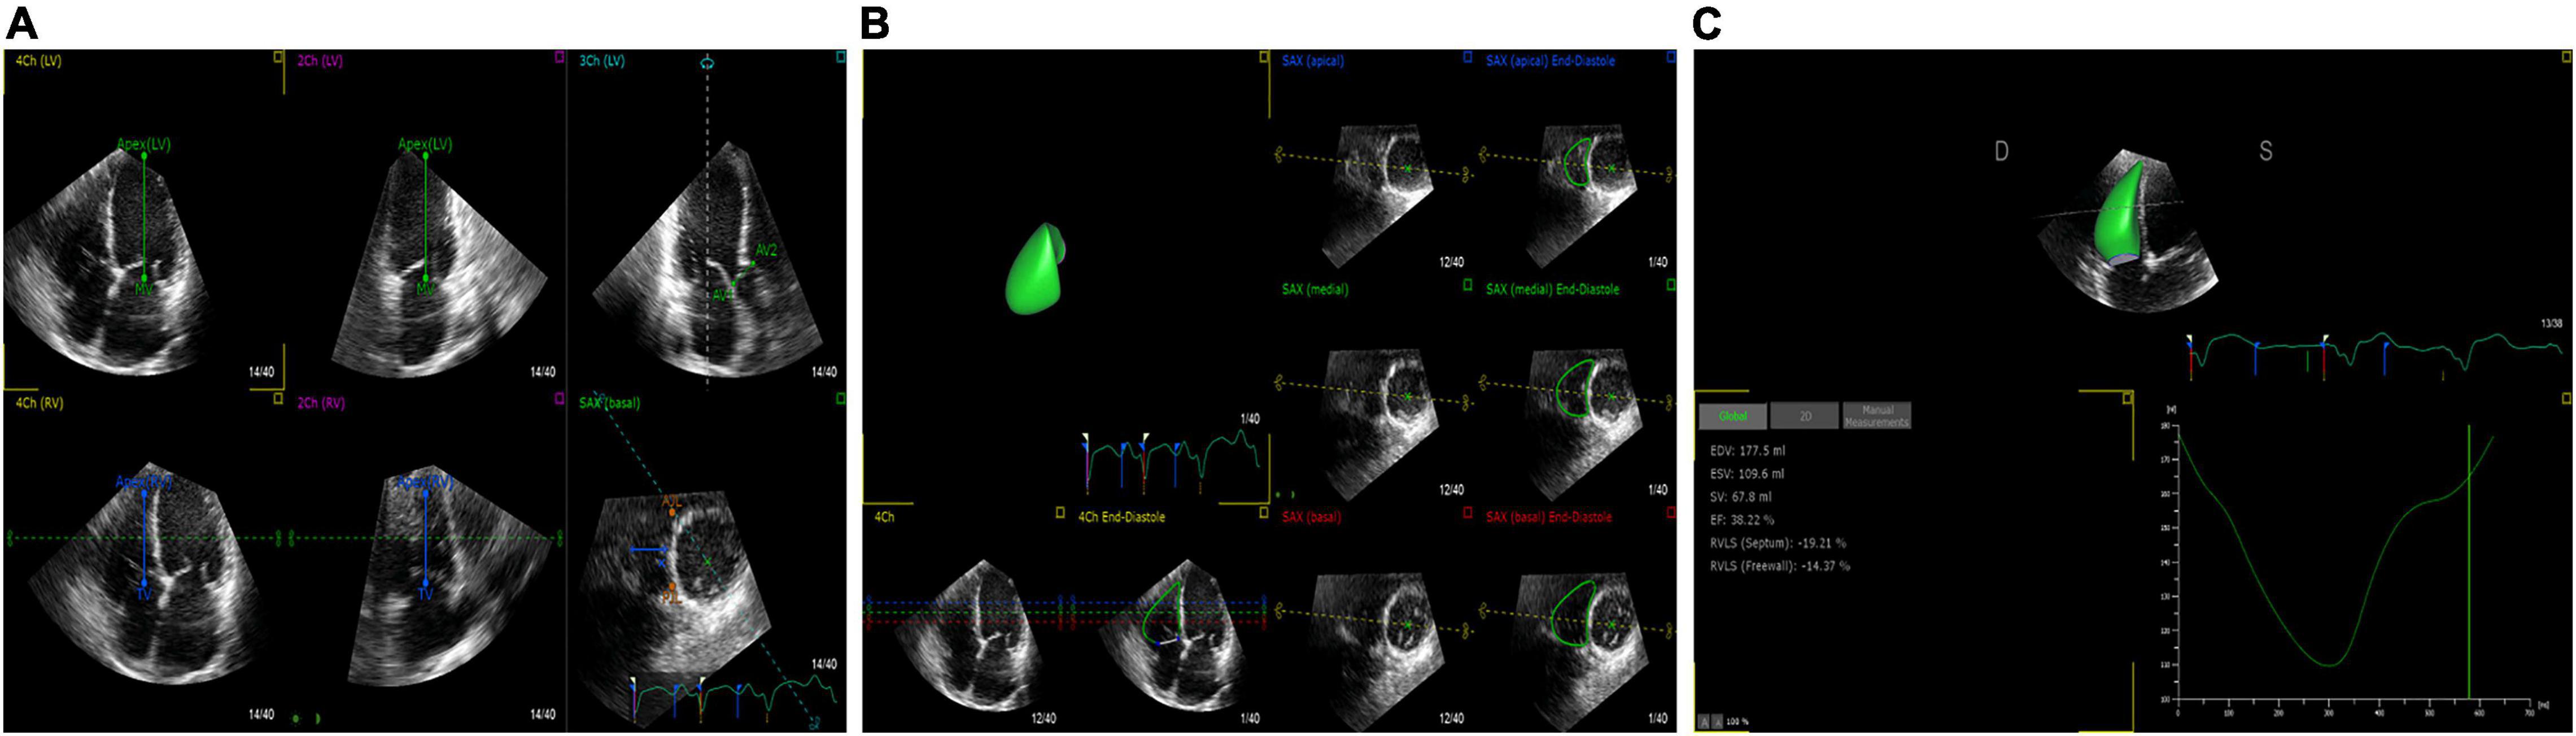 Frontiers  Evaluation of Right Ventricular Myocardial Mechanics by 2- and  3-Dimensional Speckle-Tracking Echocardiography in Patients With an  Ischemic or Non-ischemic Etiology of End-Stage Heart Failure